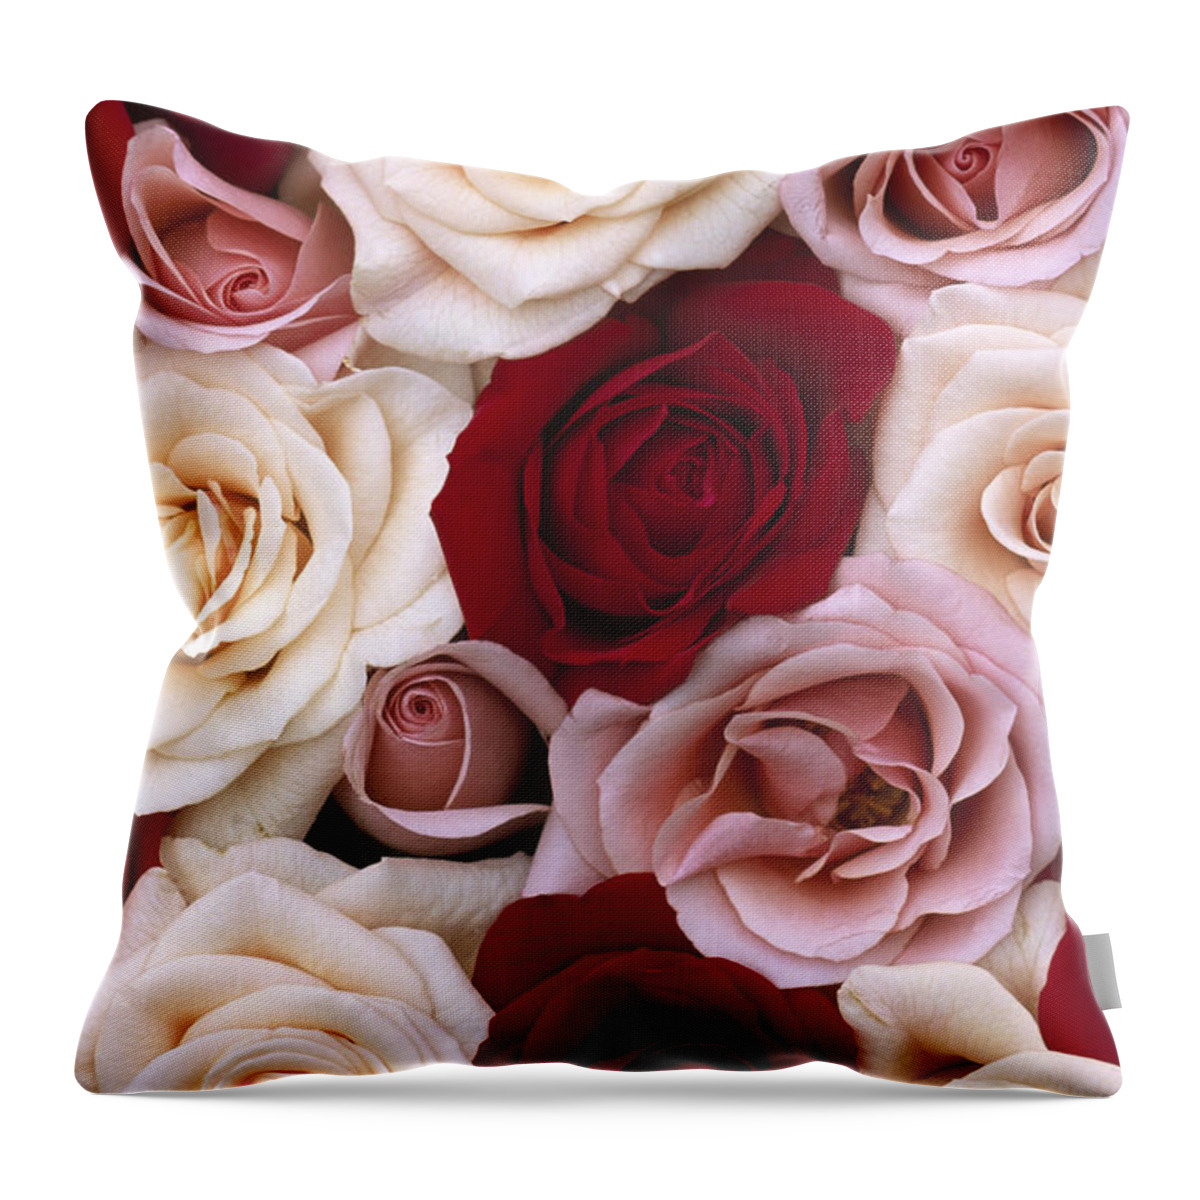 00283568 Throw Pillow featuring the photograph Rose Rosa Sp Flowers, Close Up Of Many by Jan Vermeer